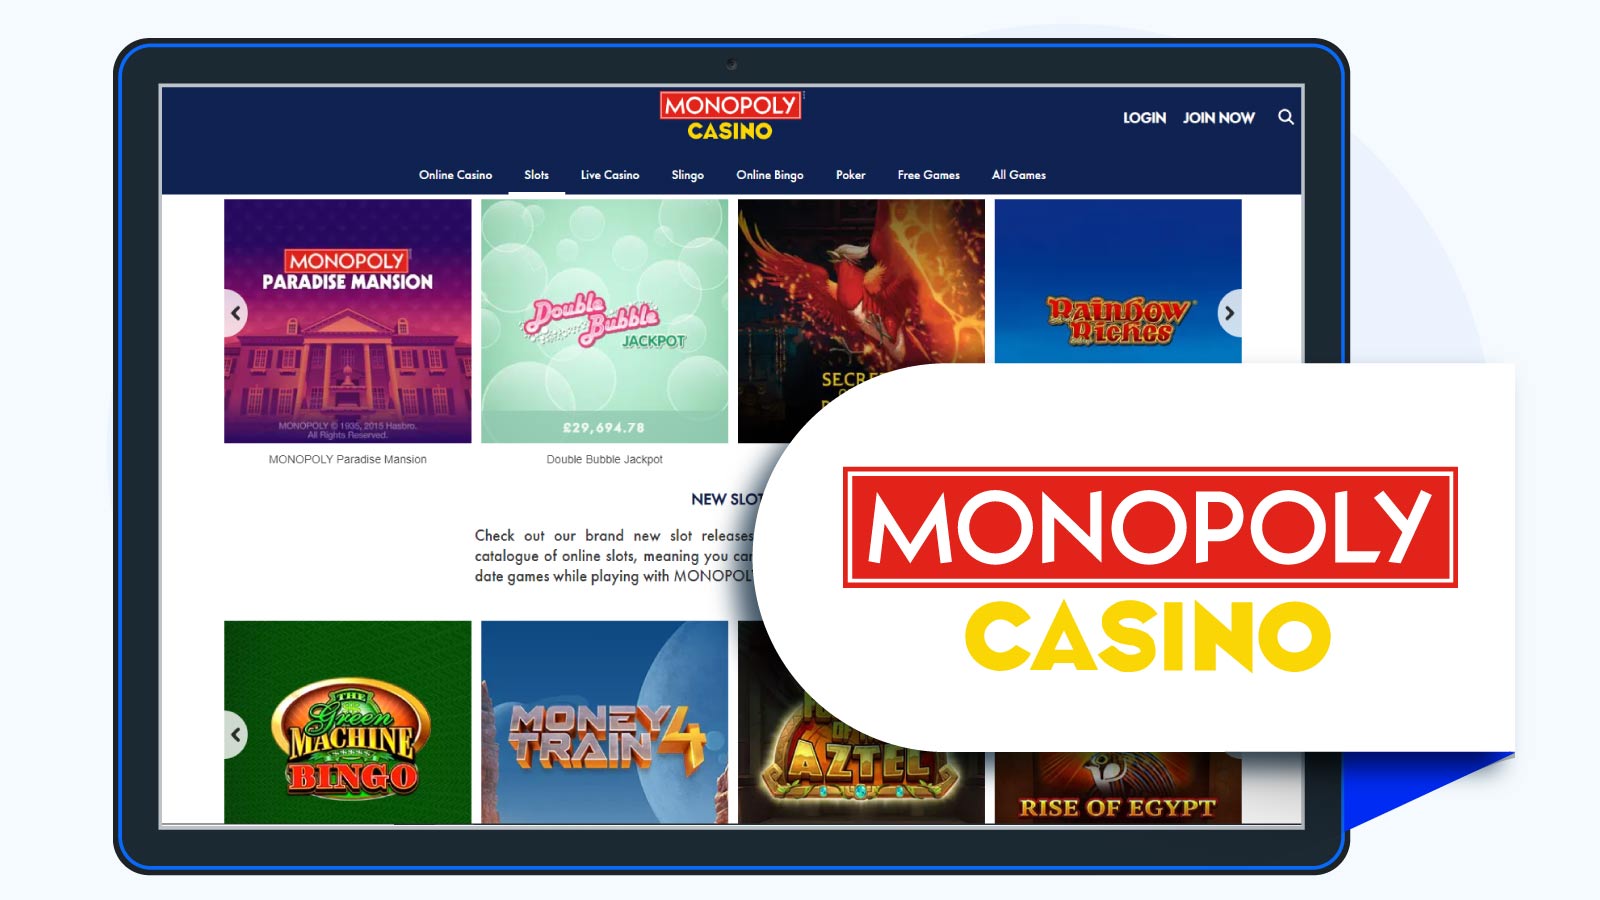 Monopoly Casino – Best Slot Site for Low Budgeters